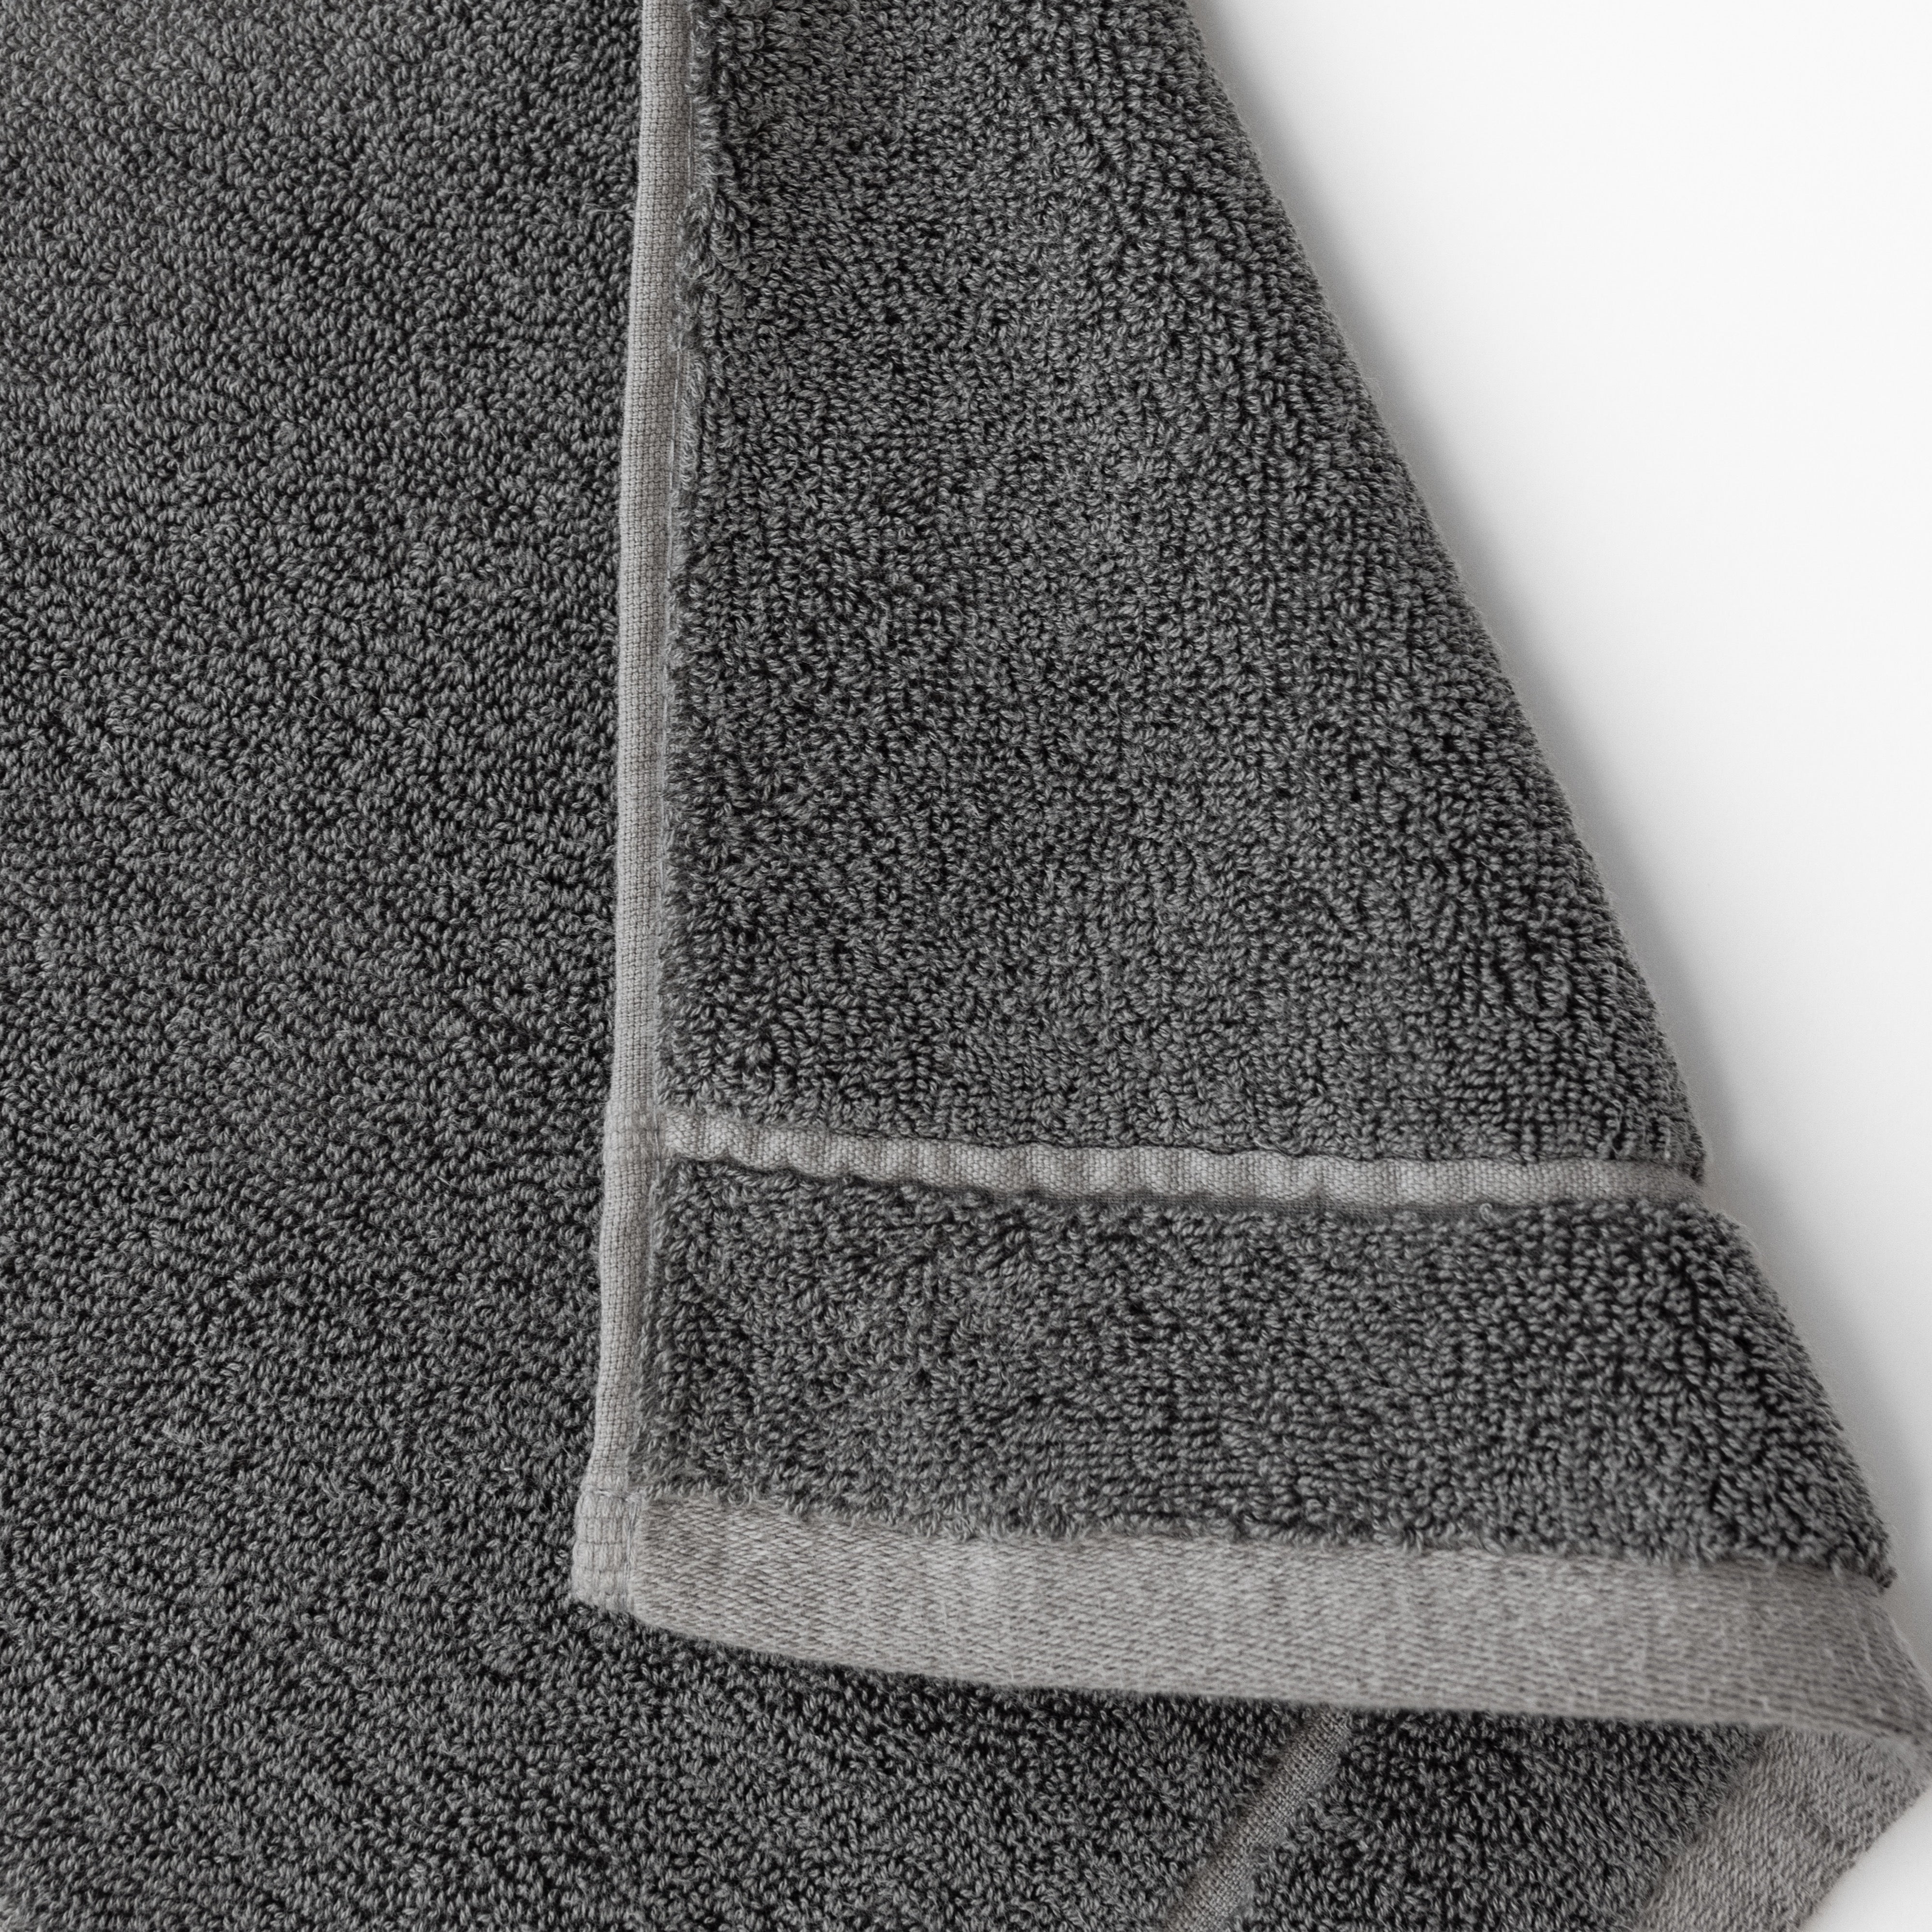 Charcoal Premium Plush Bath Towel. Photo of Premium Plush Bath Towels taken on a white background showing only the corner of the towel. |Color: Charcoal 